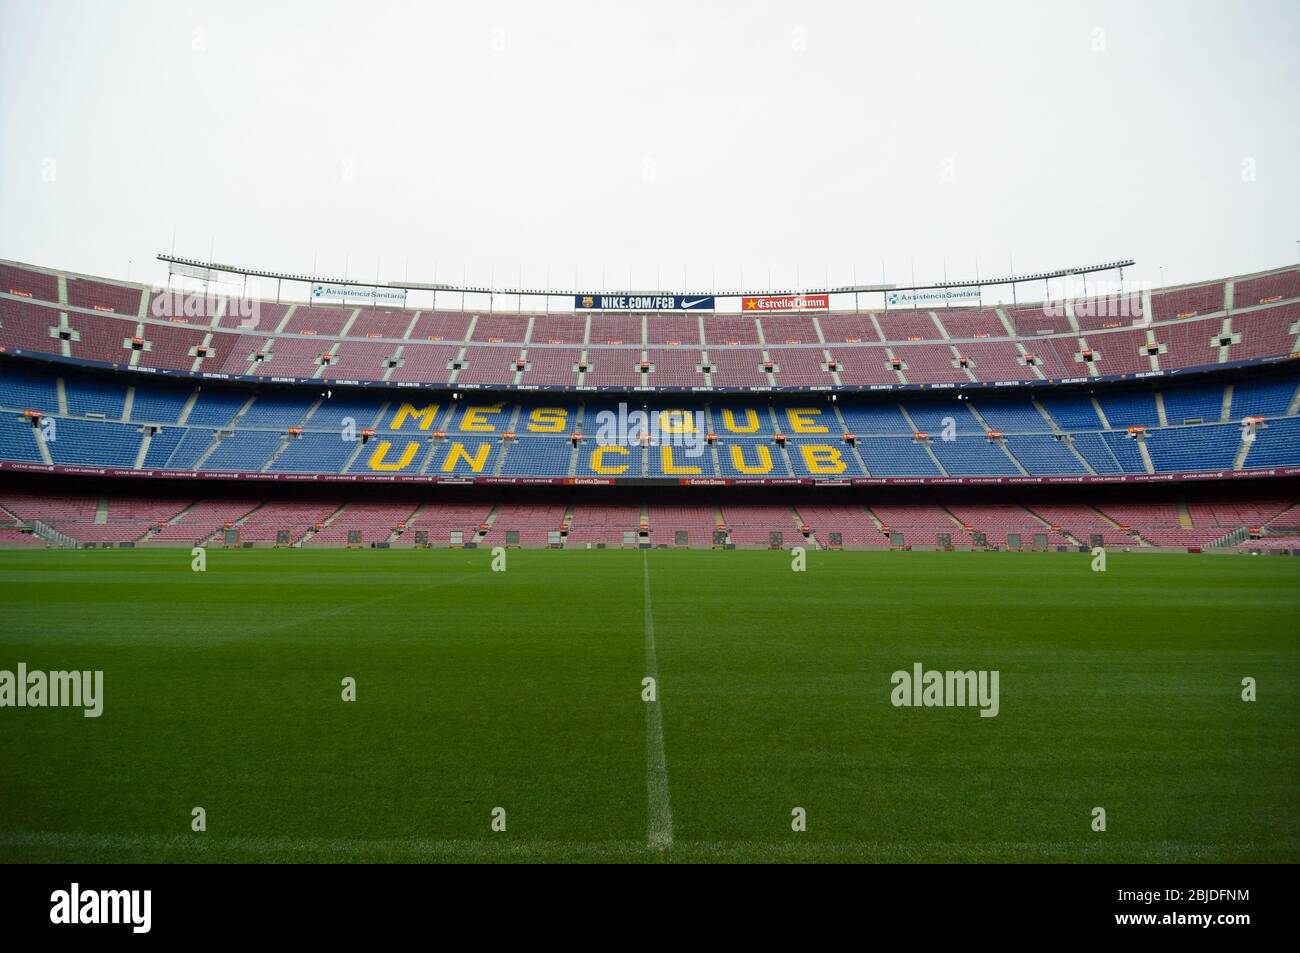 Barcelona, Spain - September 22, 2014: Camp Nou is a largest stadium in Europe. It has been the home of FC Barcelona since its completion in 1957. Bar Stock Photo